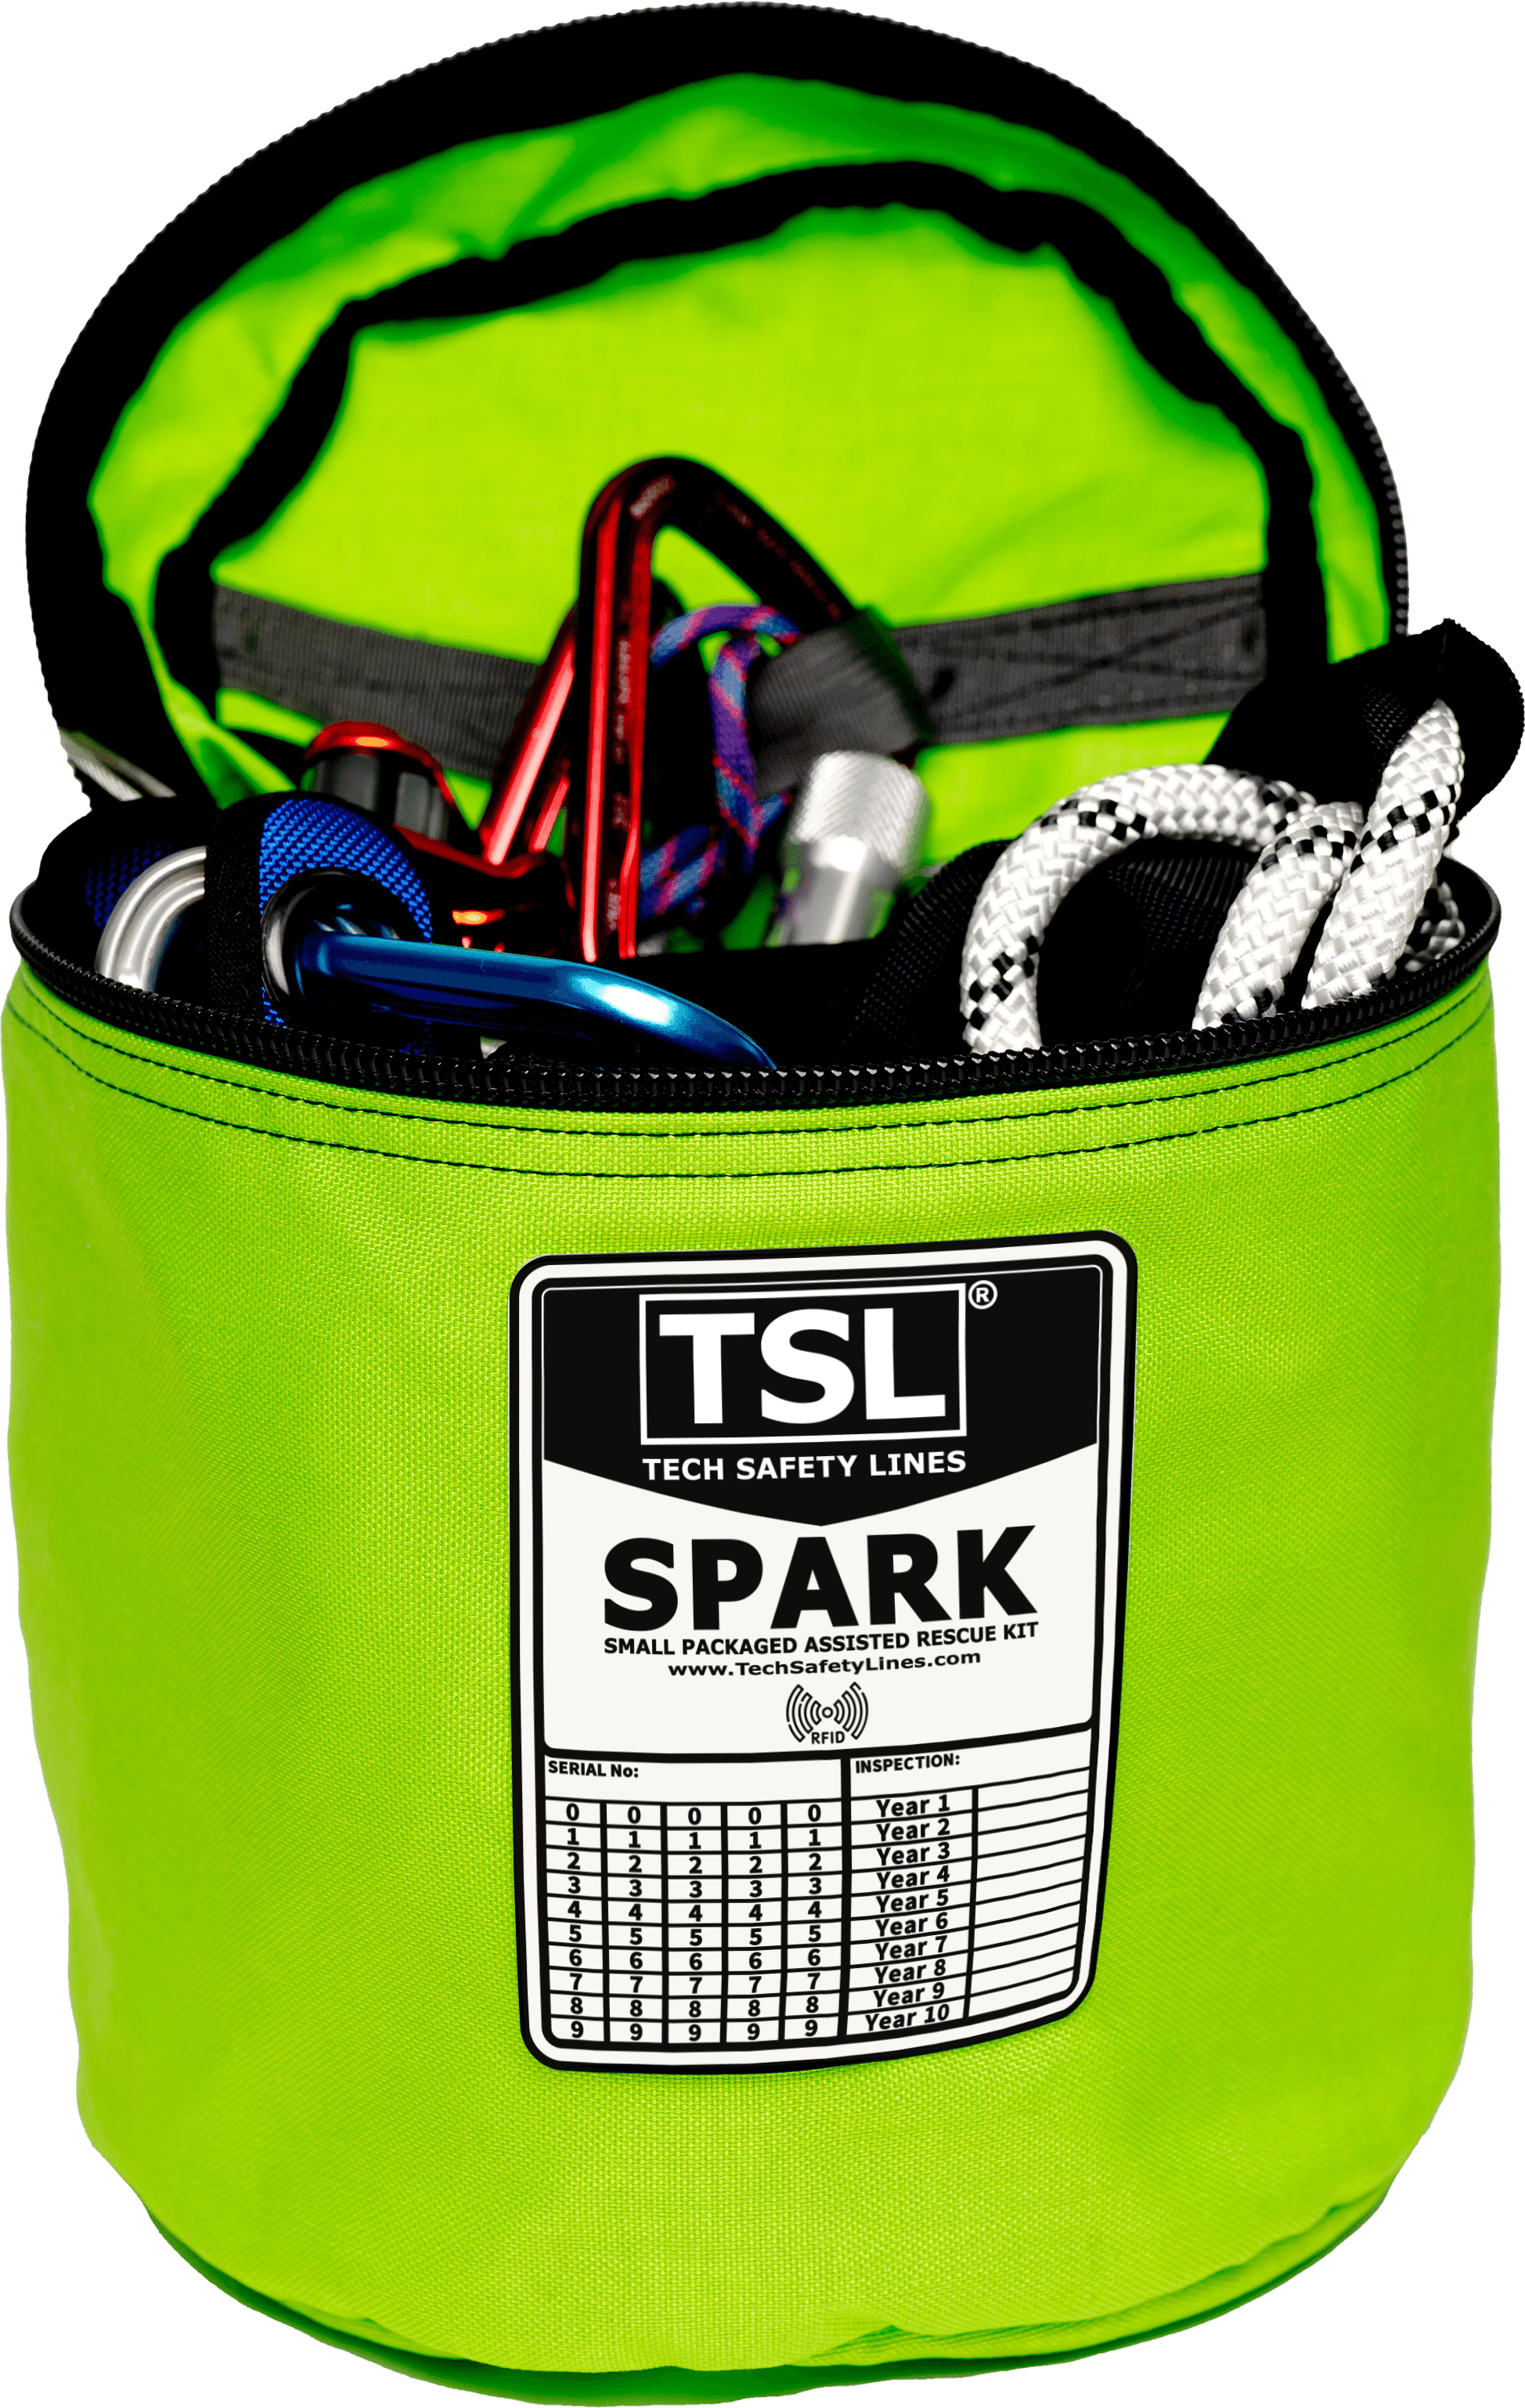 SPARK kit bag open with equipment